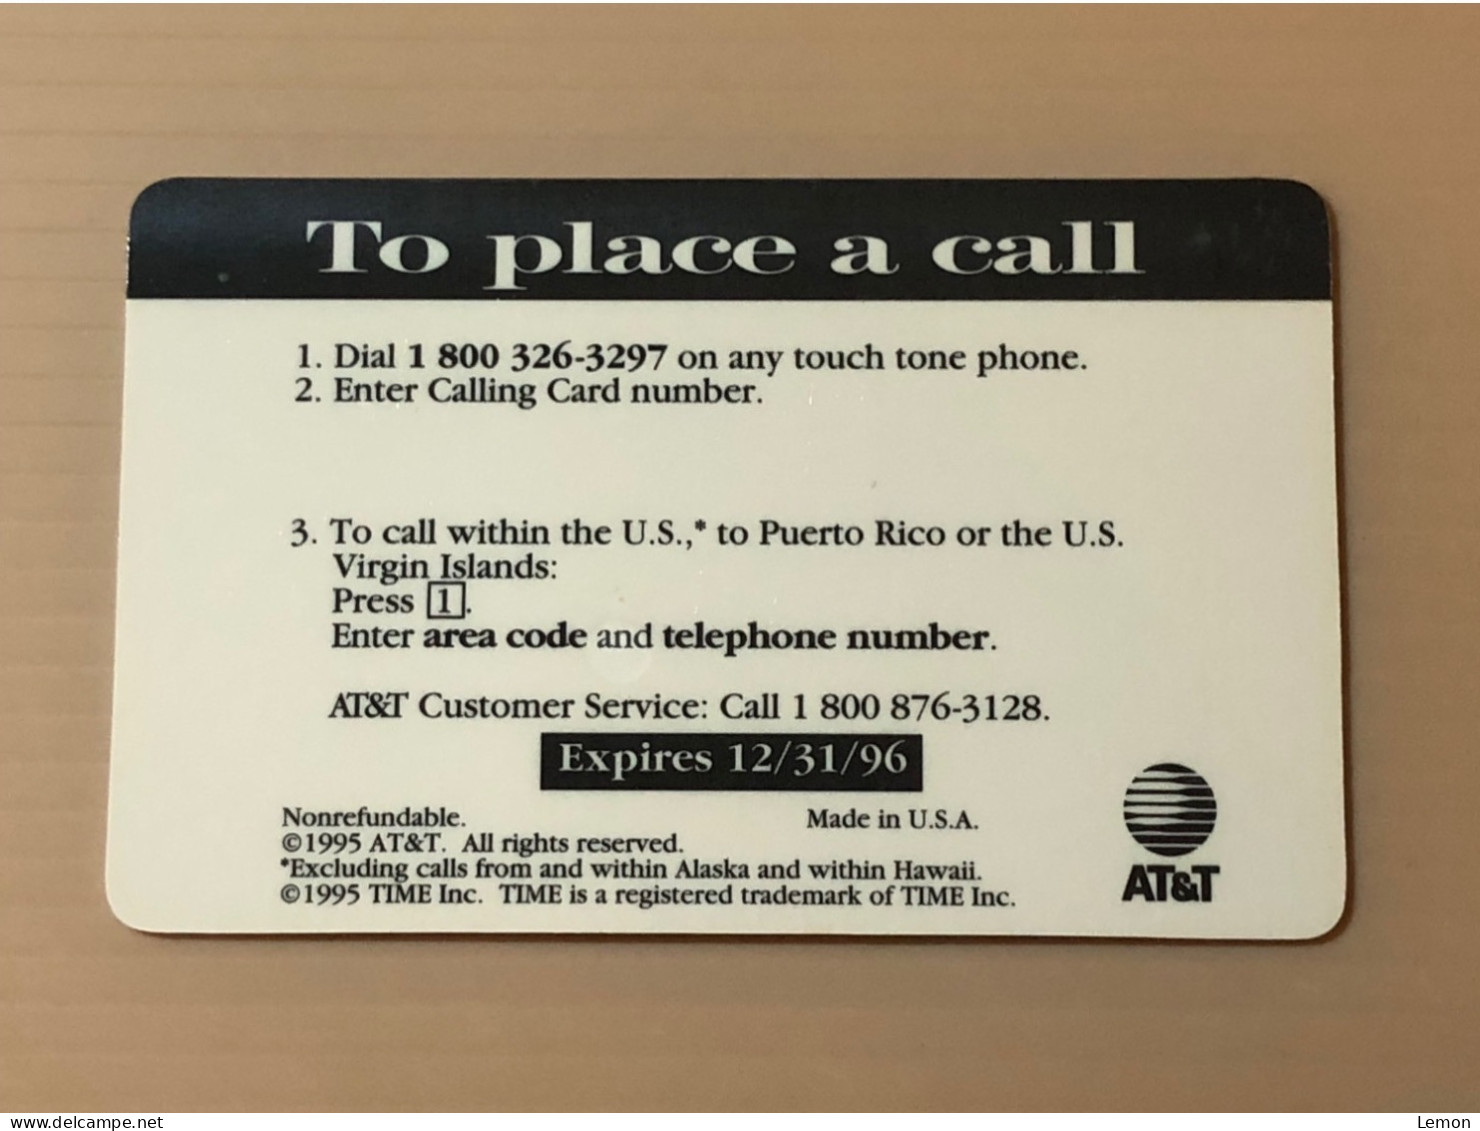 Mint USA UNITED STATES America Prepaid Telecard Phonecard, AT&T TIME Calling Card SAMPLE CARD, Set Of 1 Mint Card - Collections